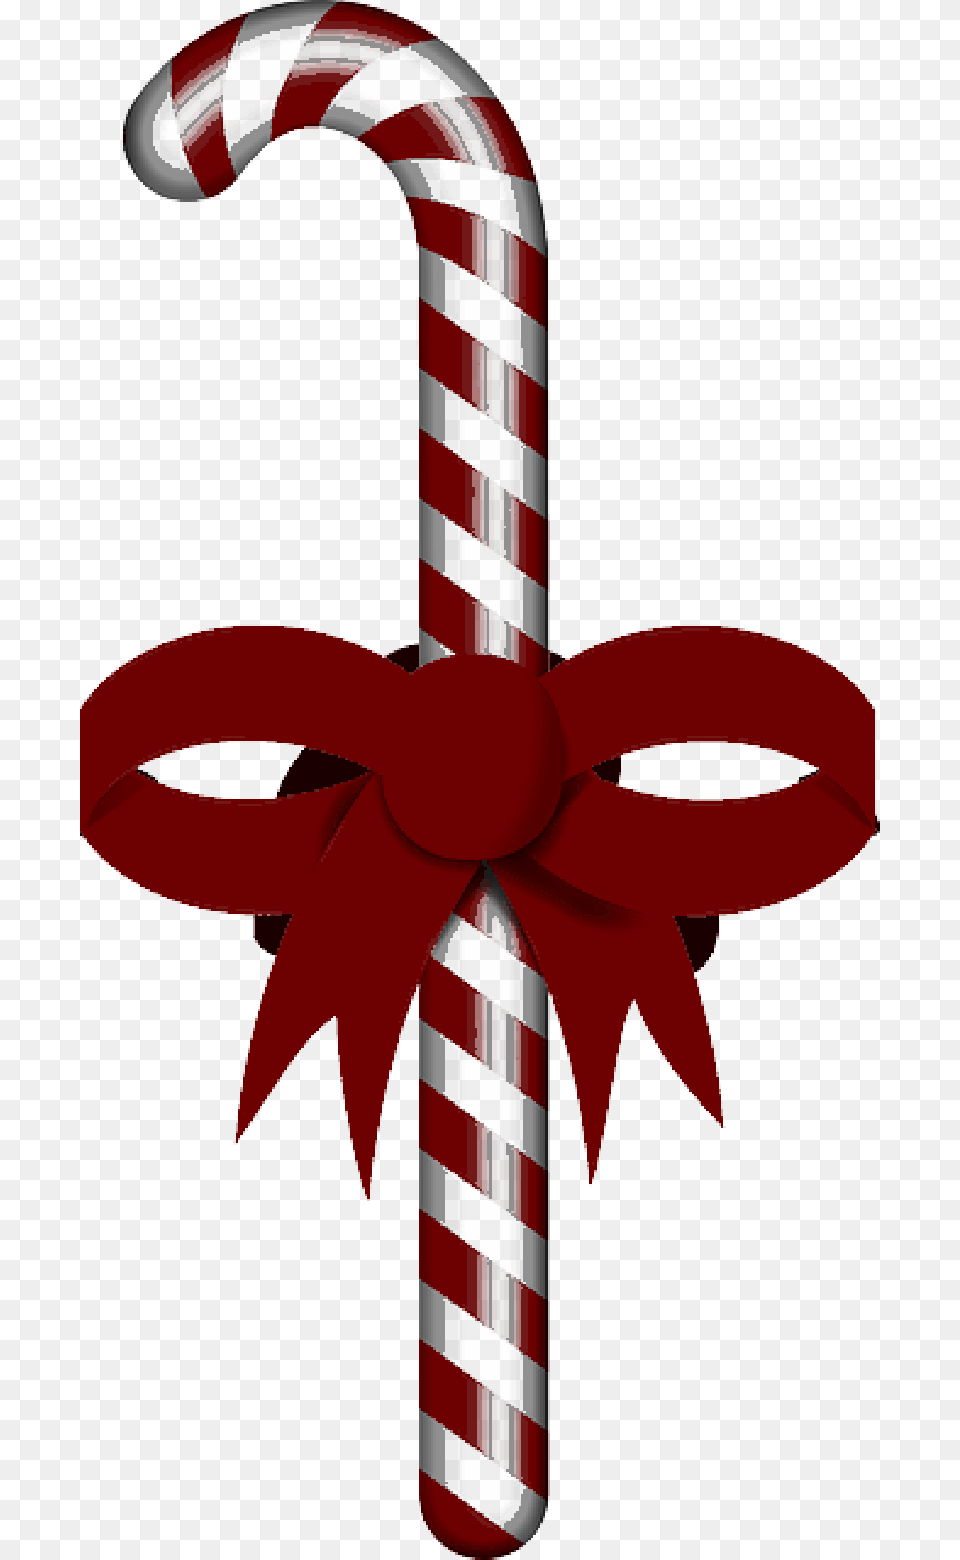 Red Stick Ribbon Candy Christmas Bow Candy Cane Clip Art, Dynamite, Weapon, Food, Sweets Png Image